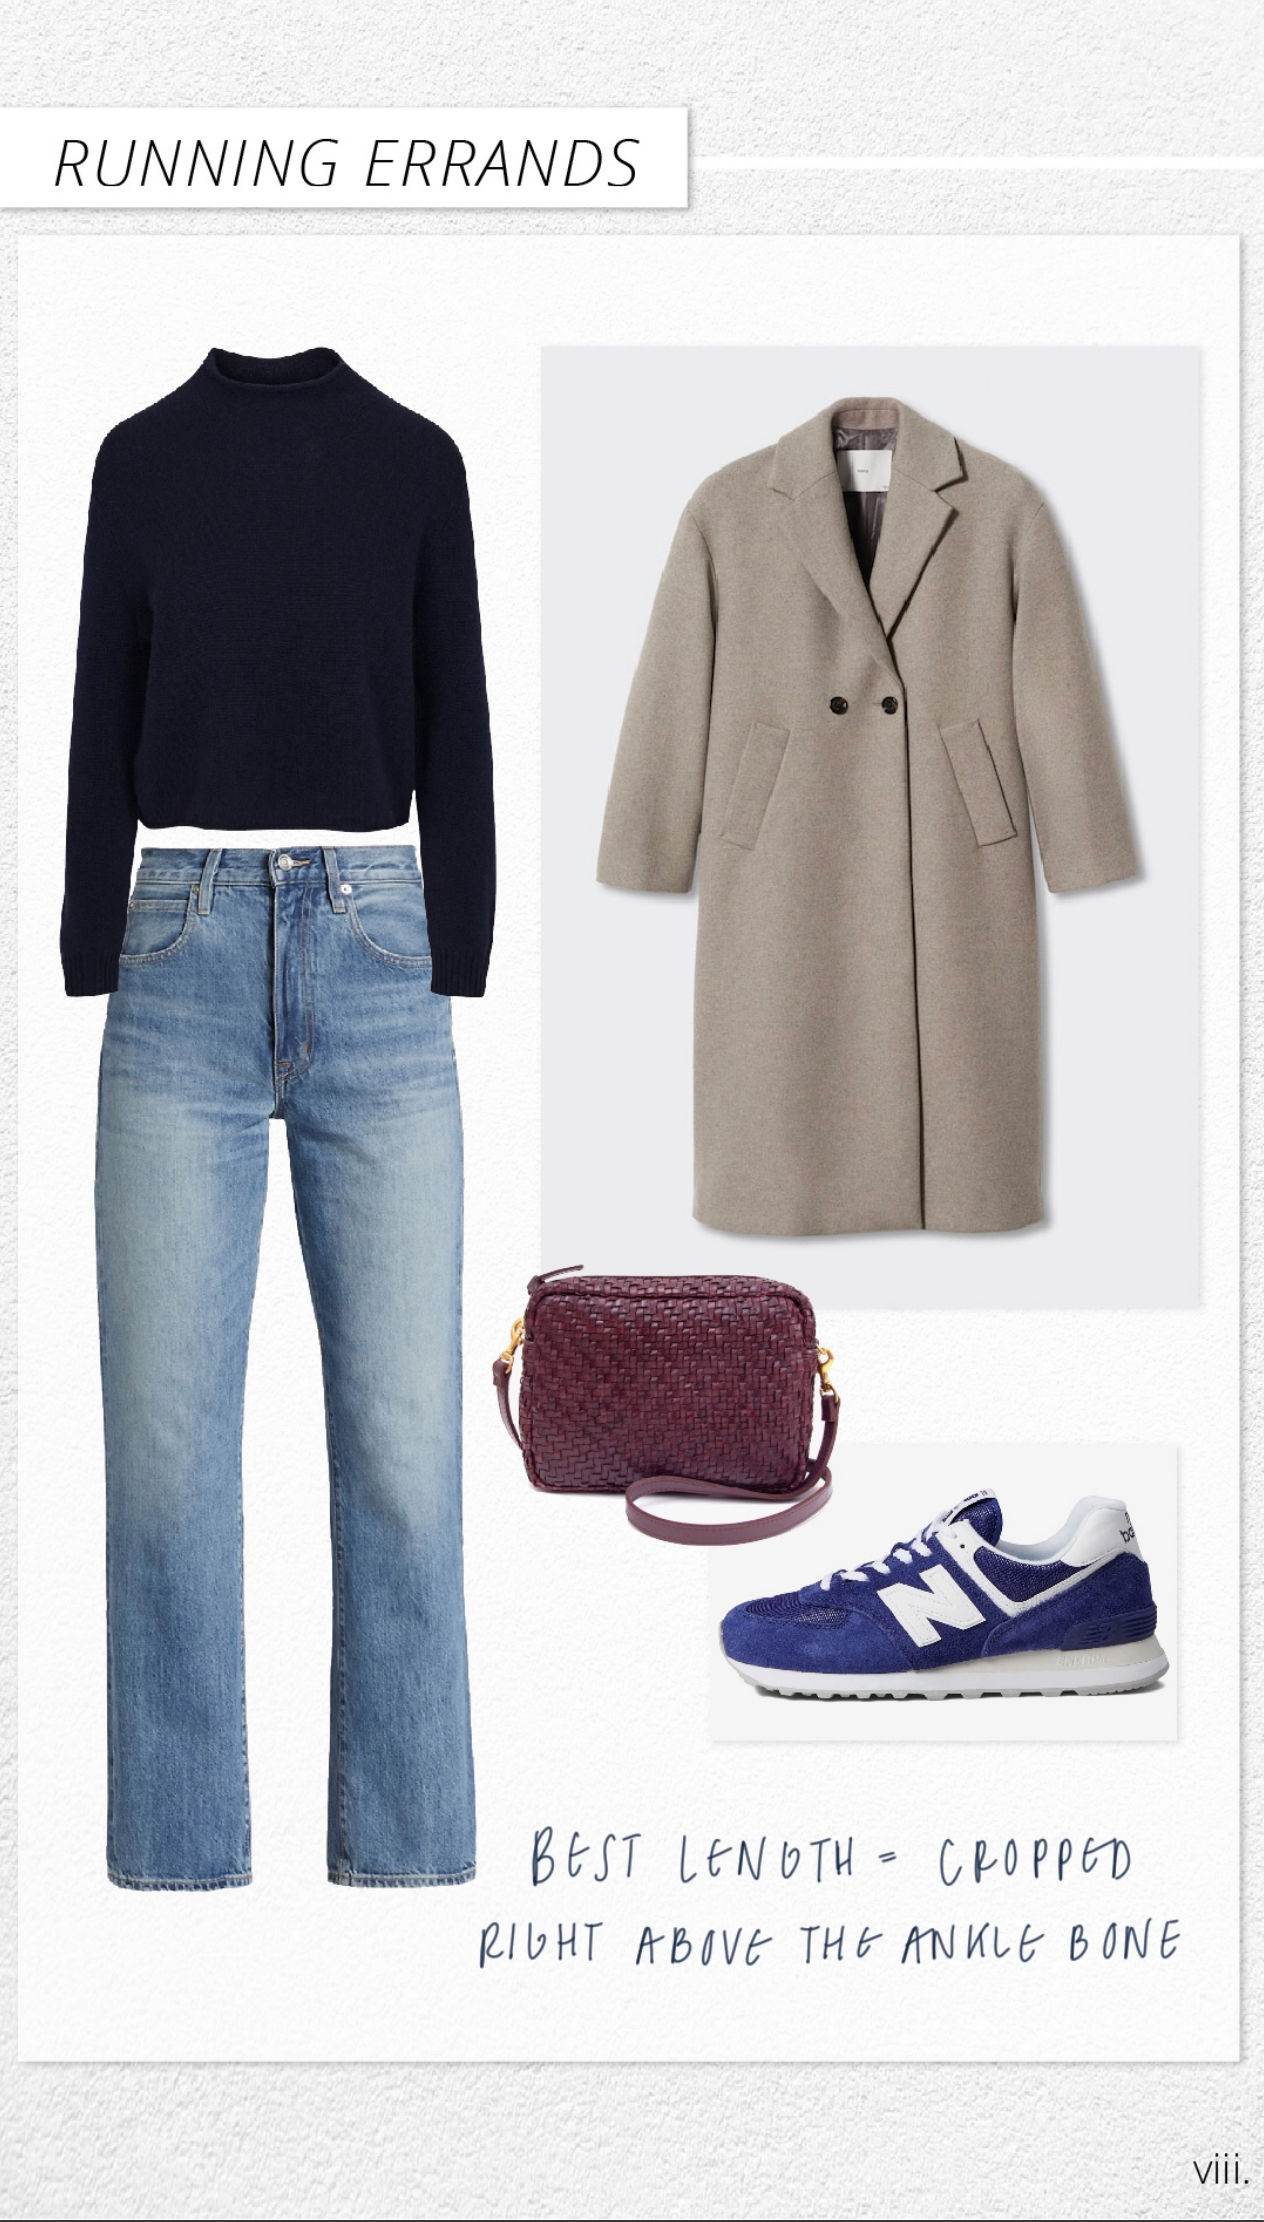 An outfit featuring straight-leg jeans, bright blue sneakers, a wool midi coat, and cropped cashmere sweater.